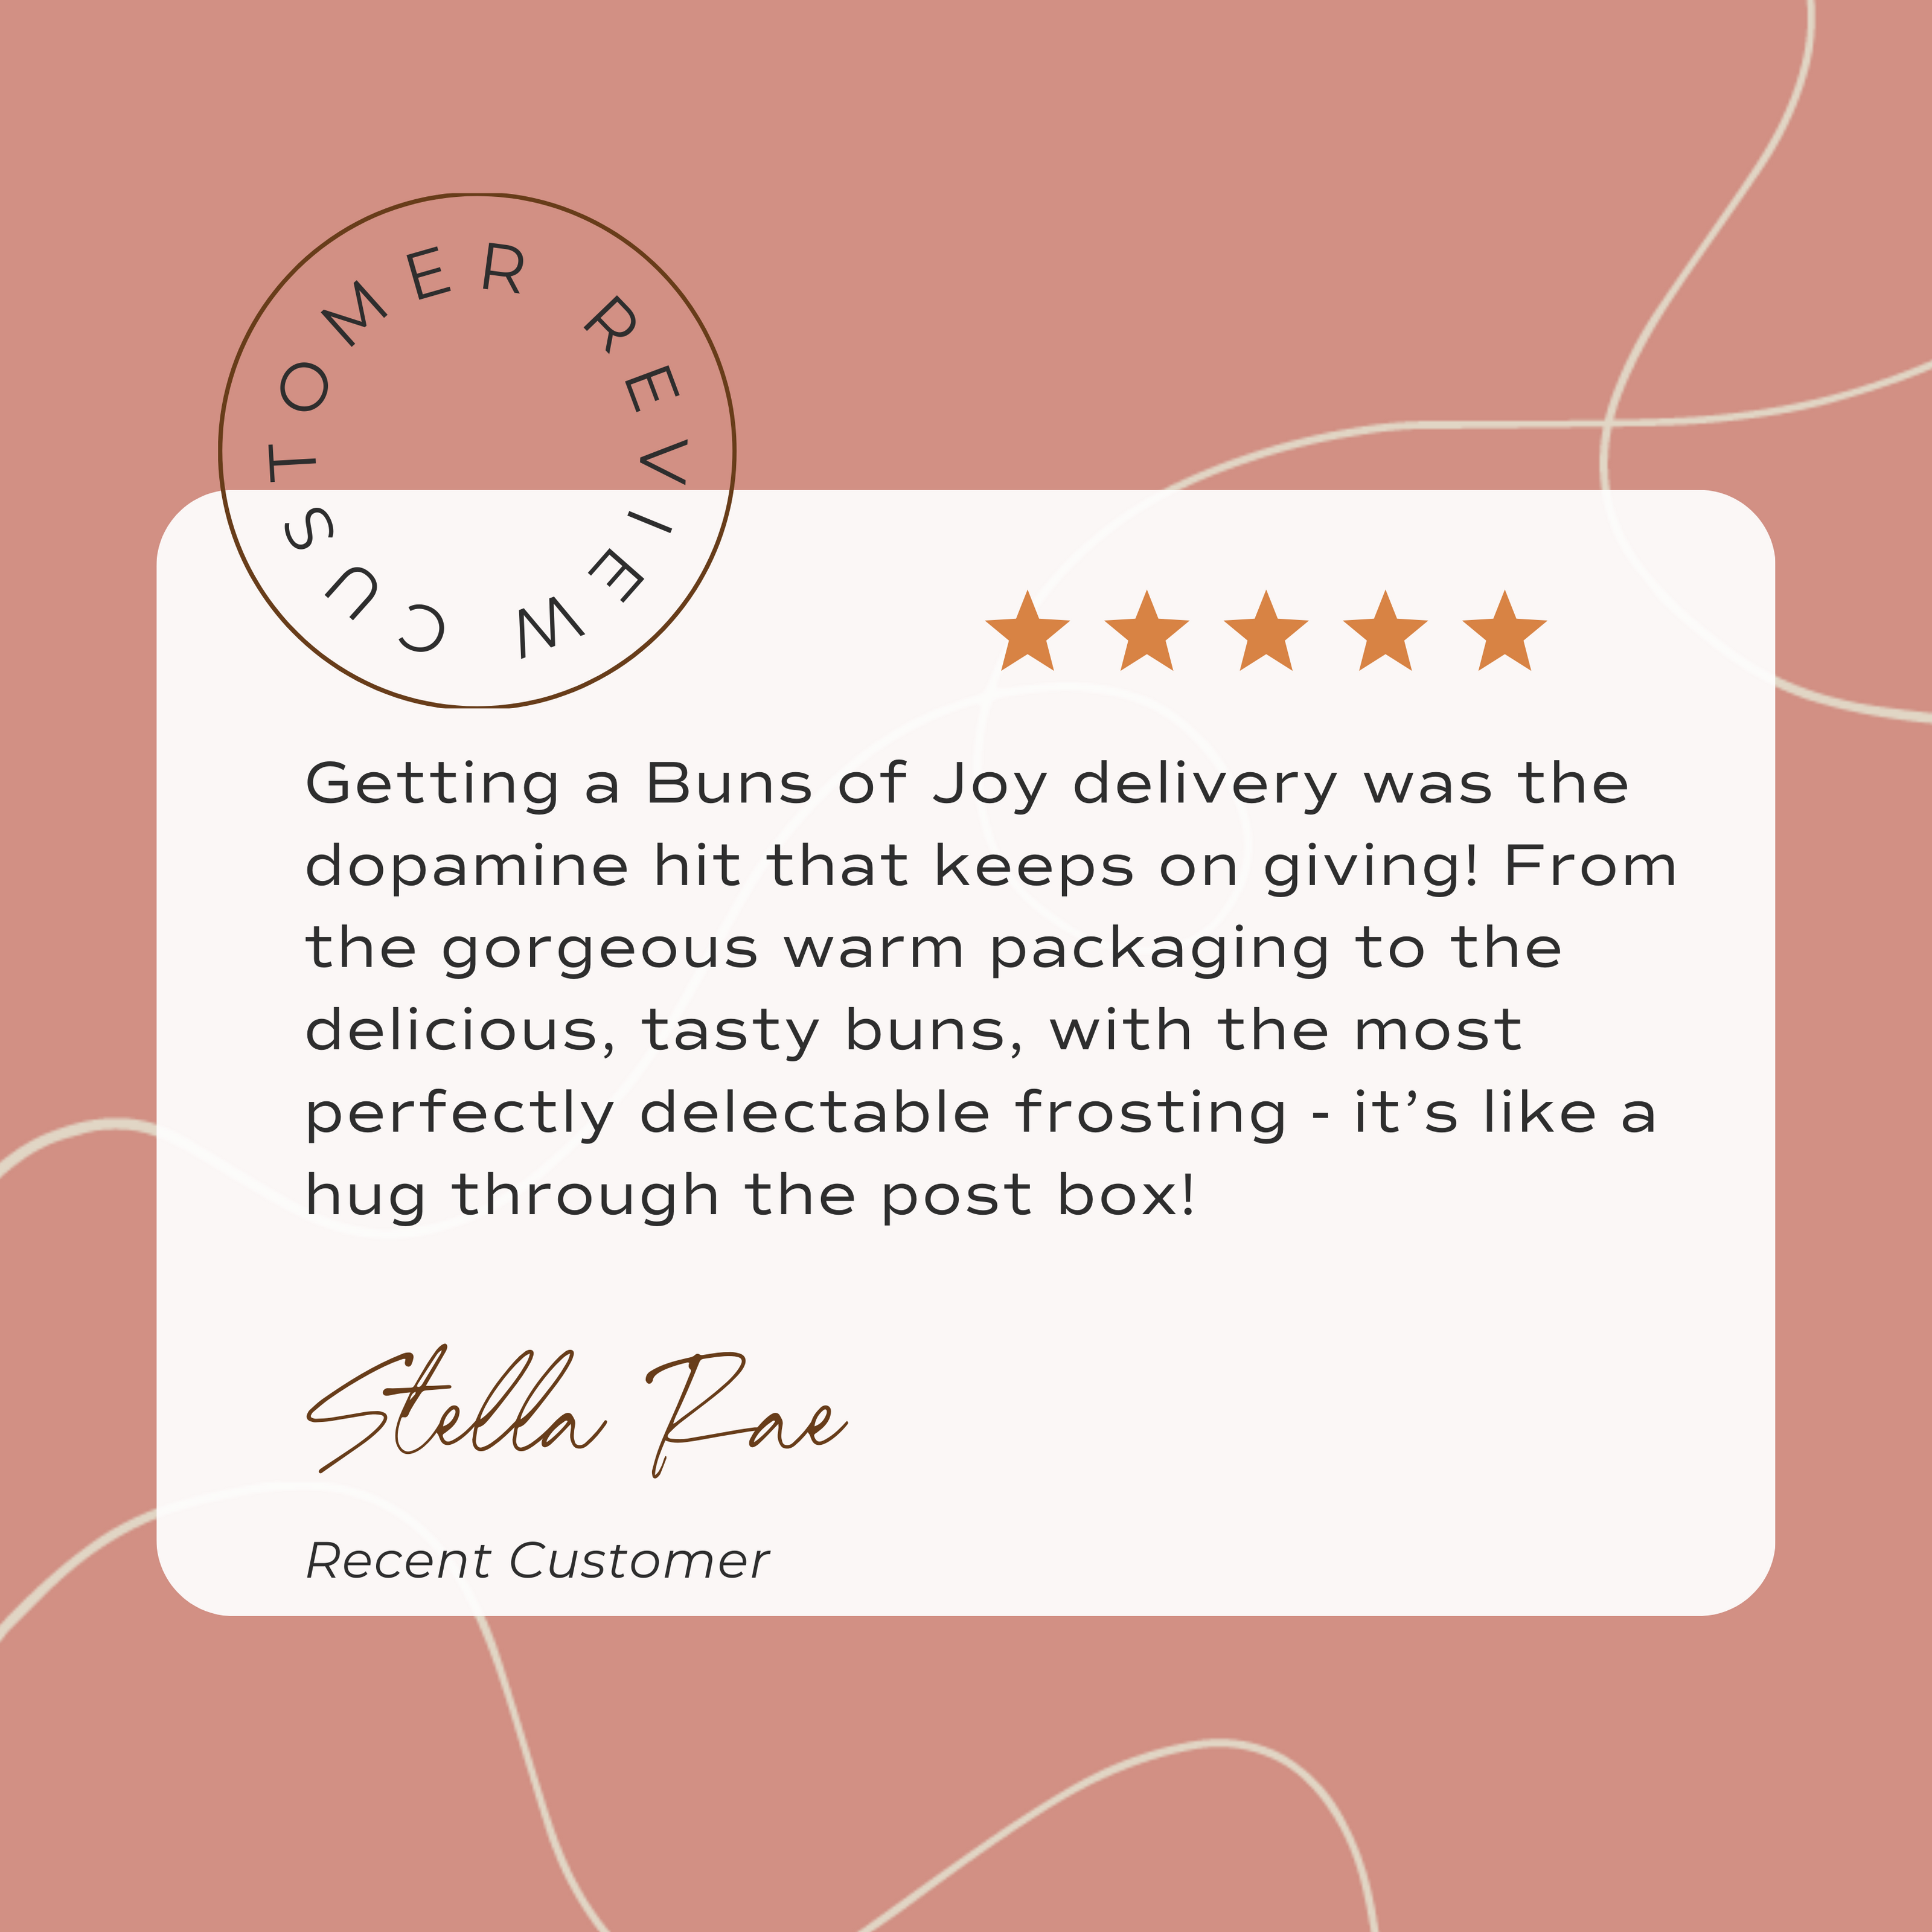 5 star customer review for Cinnamon Buns from Stella